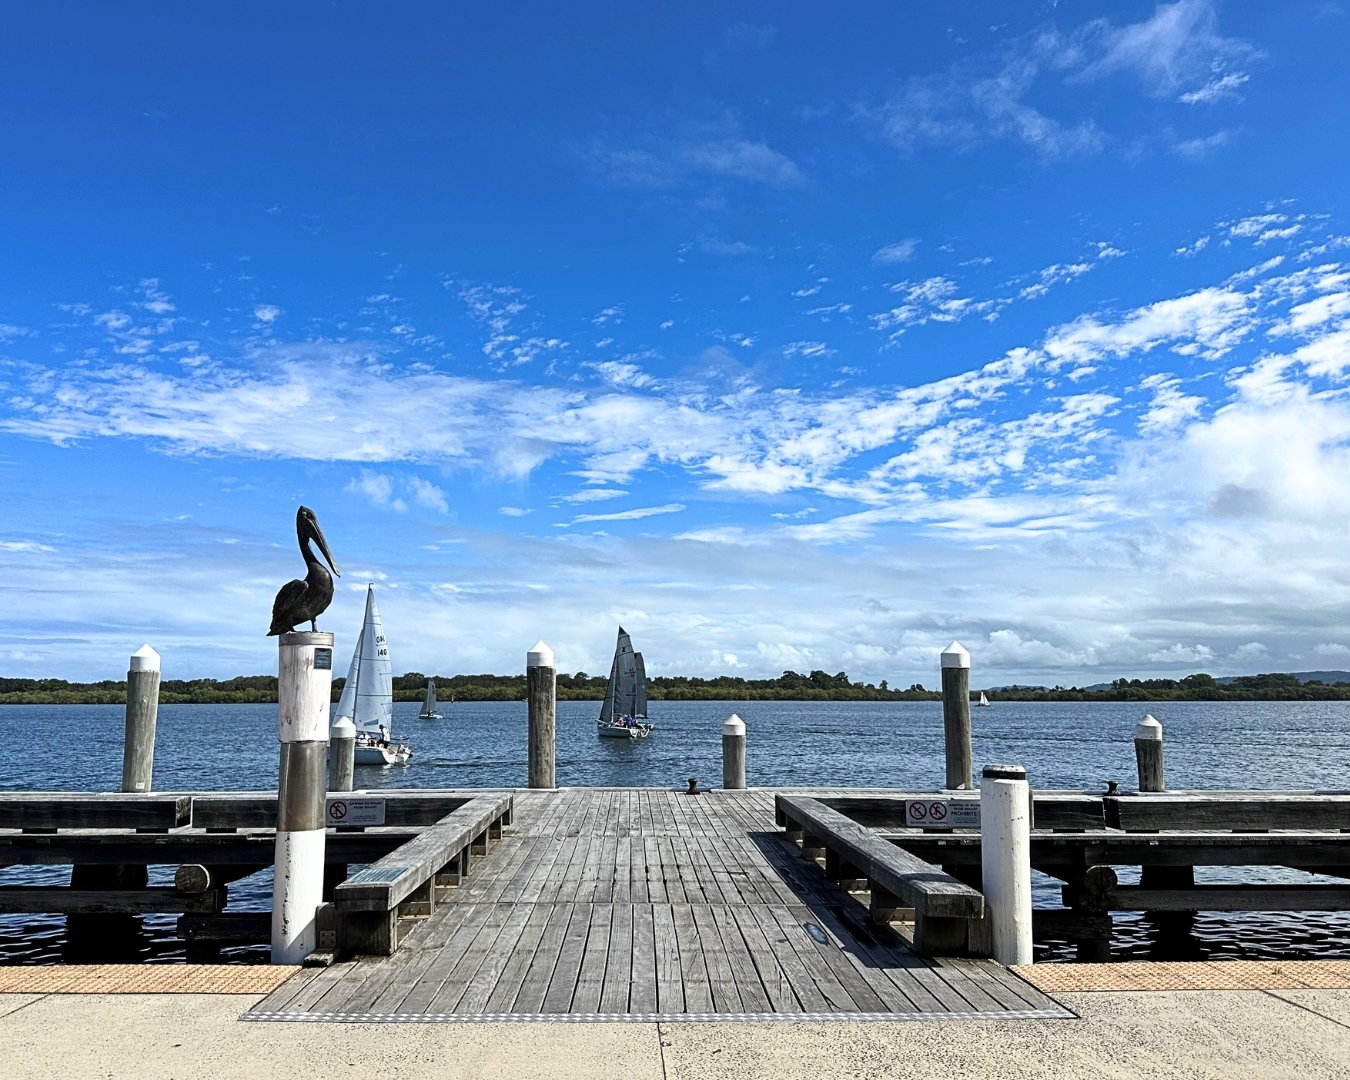 Welcome to Wharf! This is our view every day, join us for great food, views and service on the Richmond River. 

We serve Lunch &amp; Dinner every day and Breakfast Thurs-Mon. 

Book your table: https://www.wharfbarballina.com.au/book

#wharfbarballi